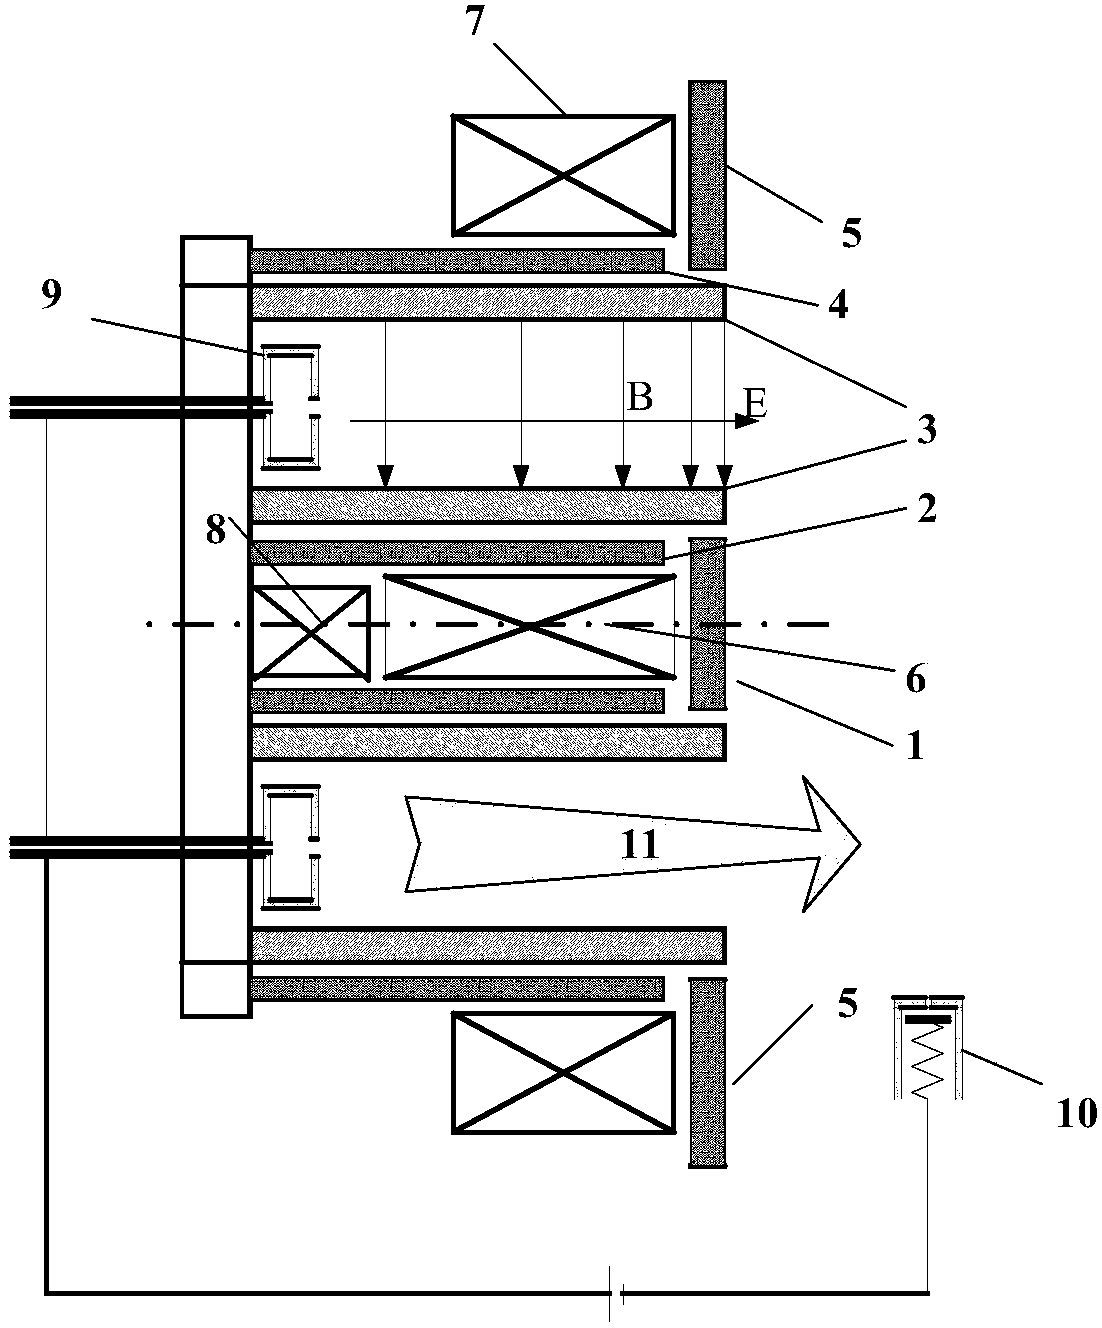 Magnetic circuit structure design method under long service life design of magnetic focusing Hall thruster